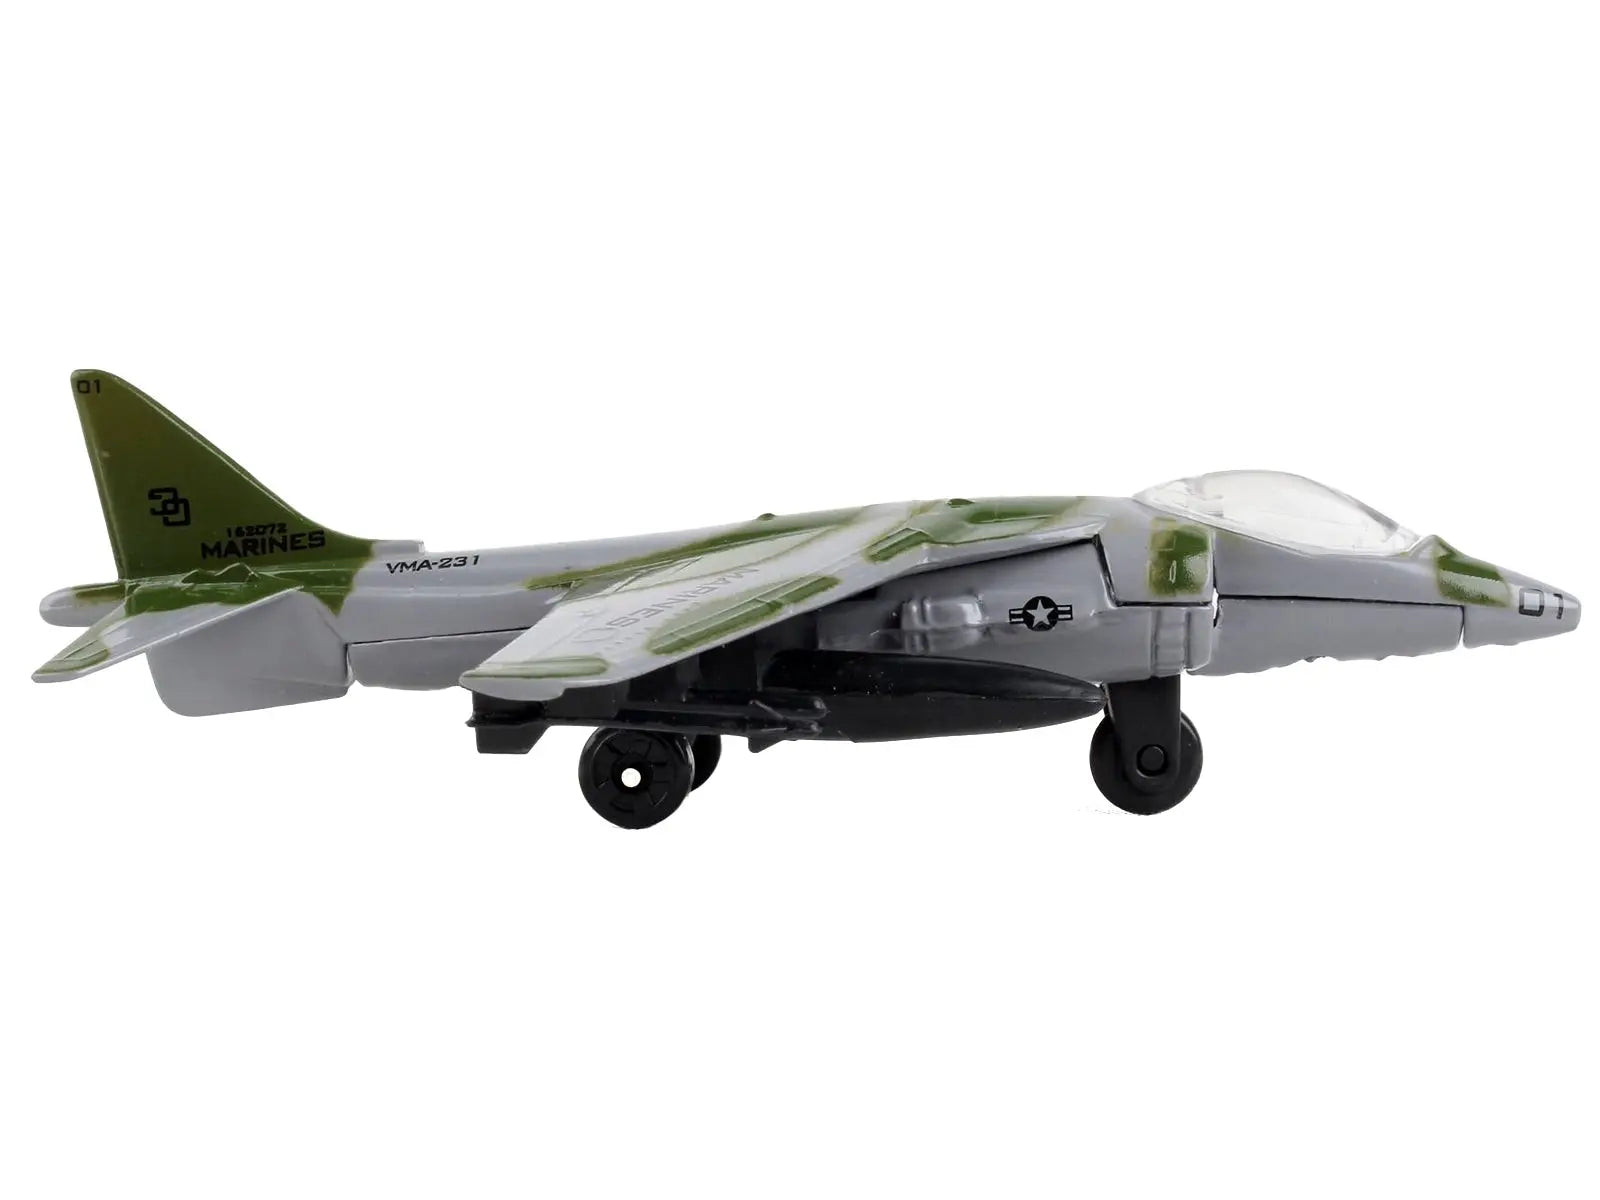 McDonnell Douglas AV-8B Harrier II Attack Aircraft Green Camouflage "United States Marine Corps" with Runway Section Diecast Model Airplane by Runway24 Runway24